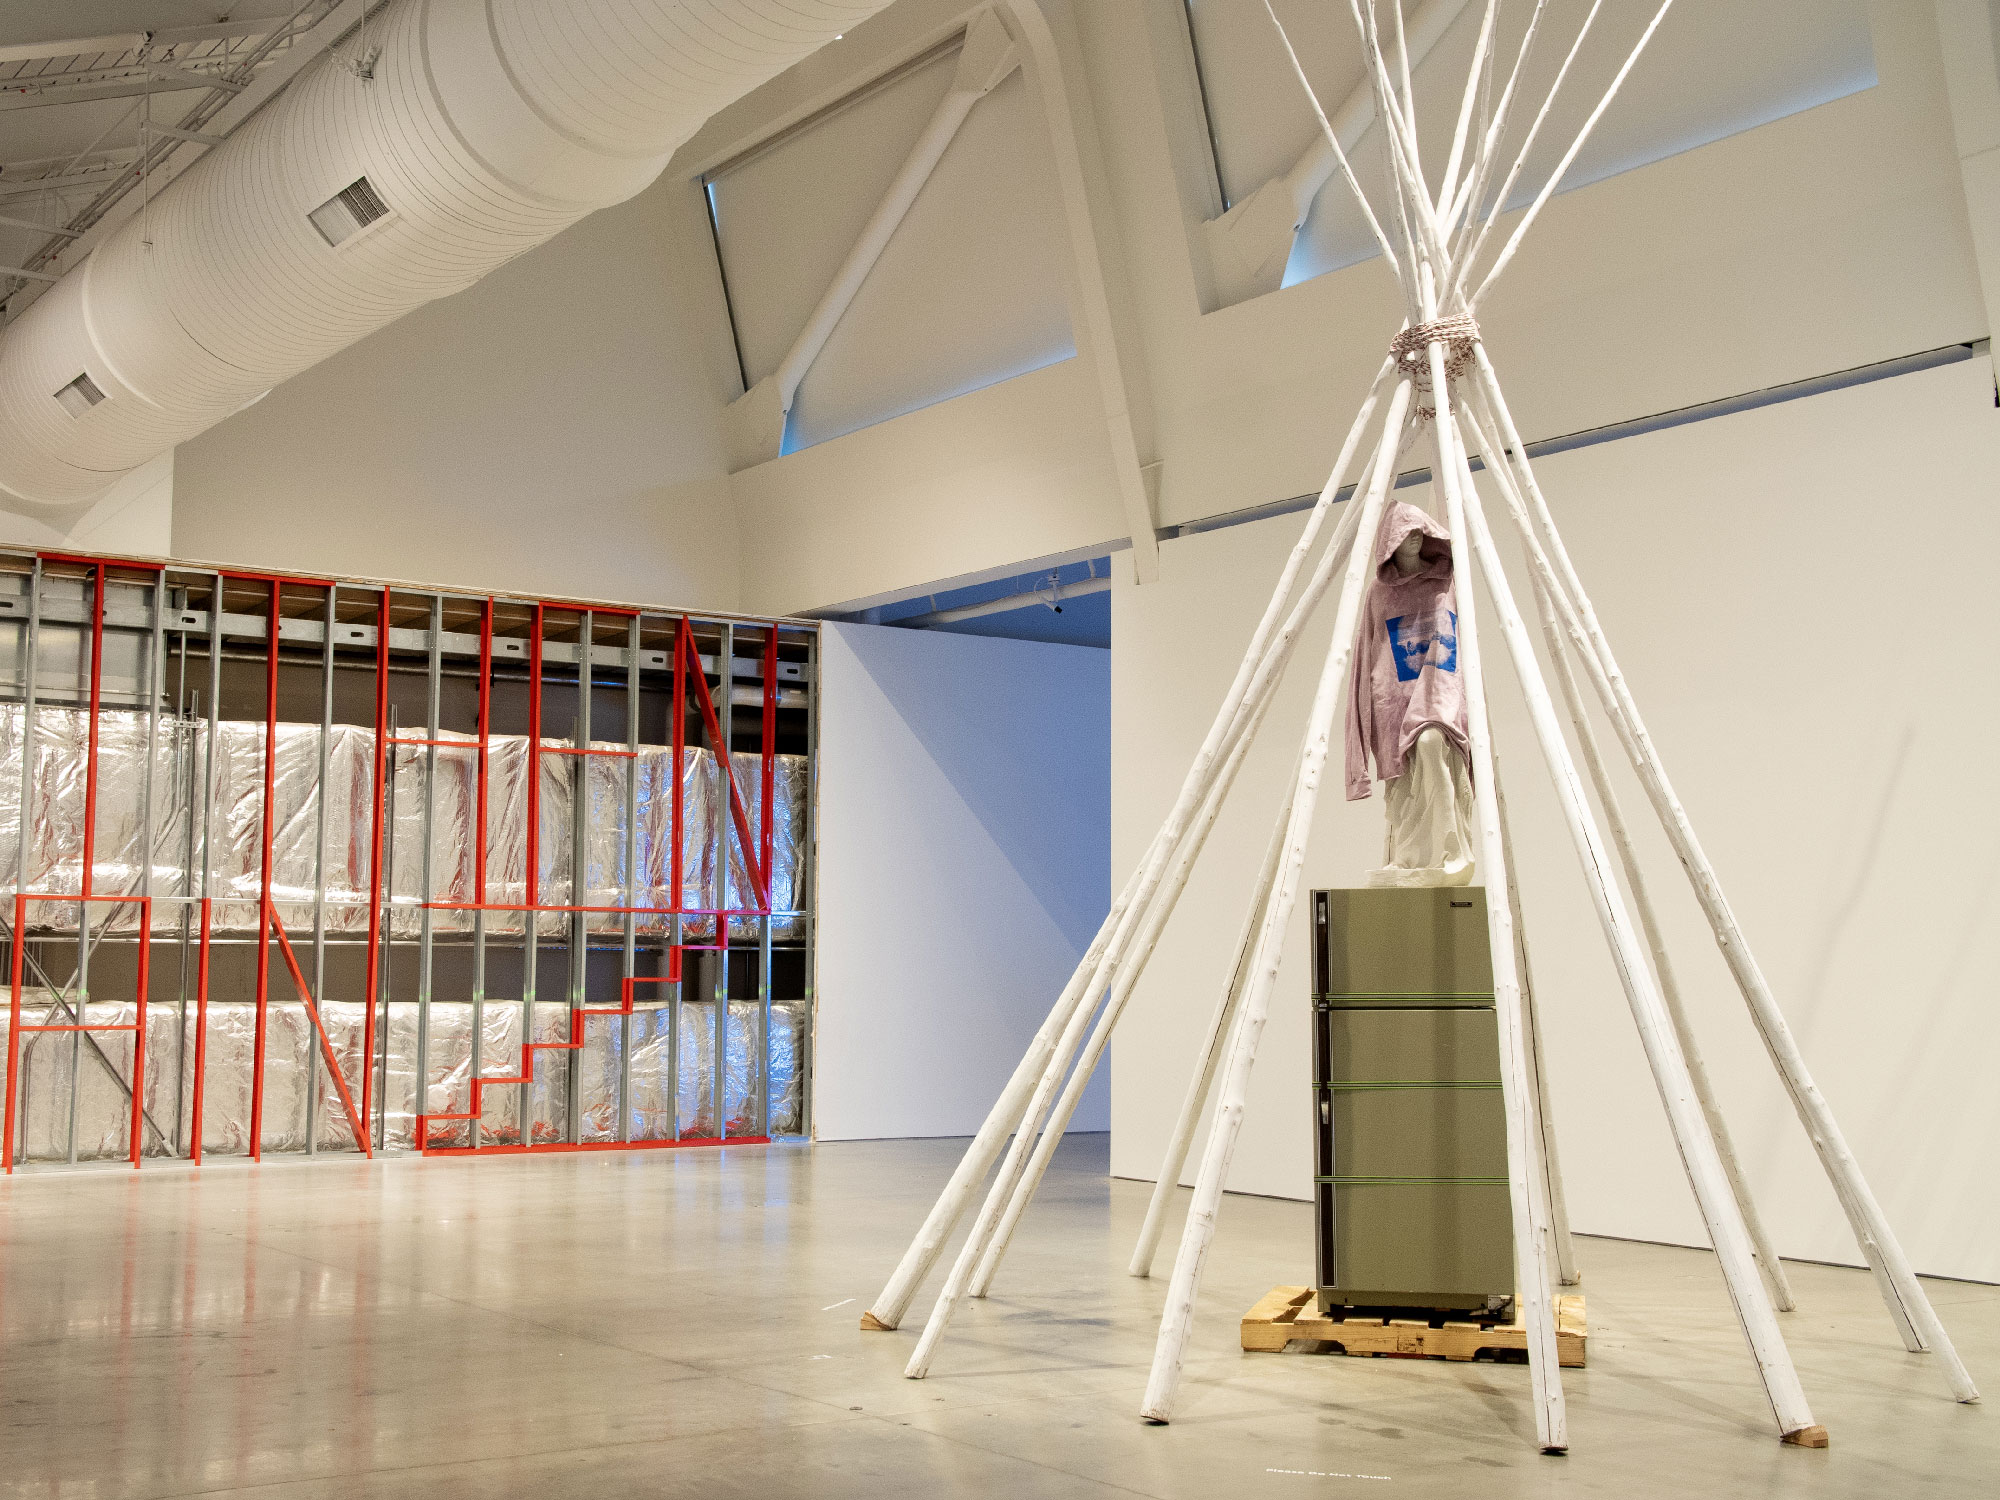 A white-pole tepee sculpture in a gallery space, with a wall behind partially demolished, red paint on the metal beams spells out words